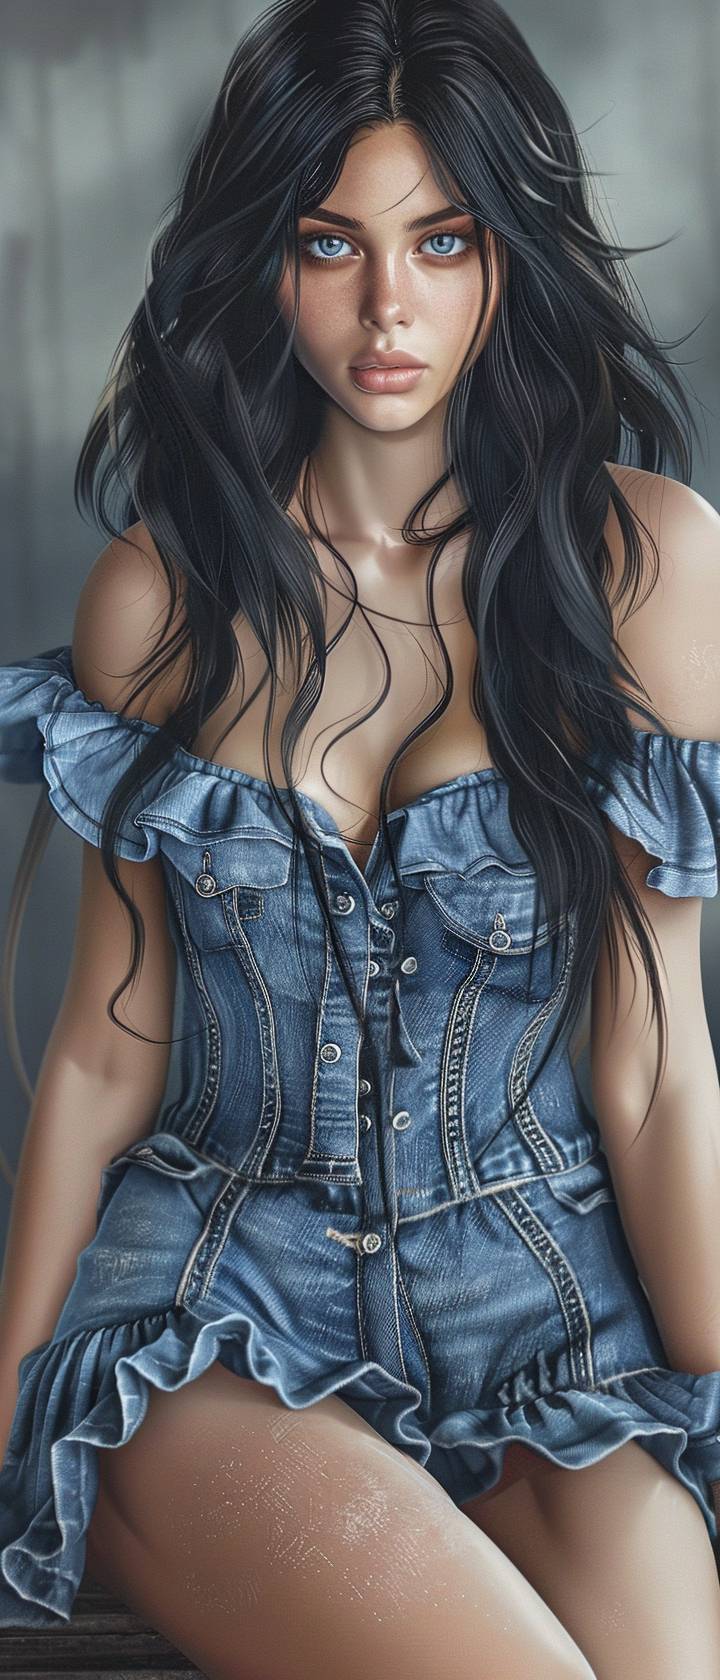 A beautiful woman, a fashion model, with deep facial features and a great figure, showing shoulders and thighs, wearing a denim dress with ruffled edges, long black hair, real, surreal, finely detailed facial features.